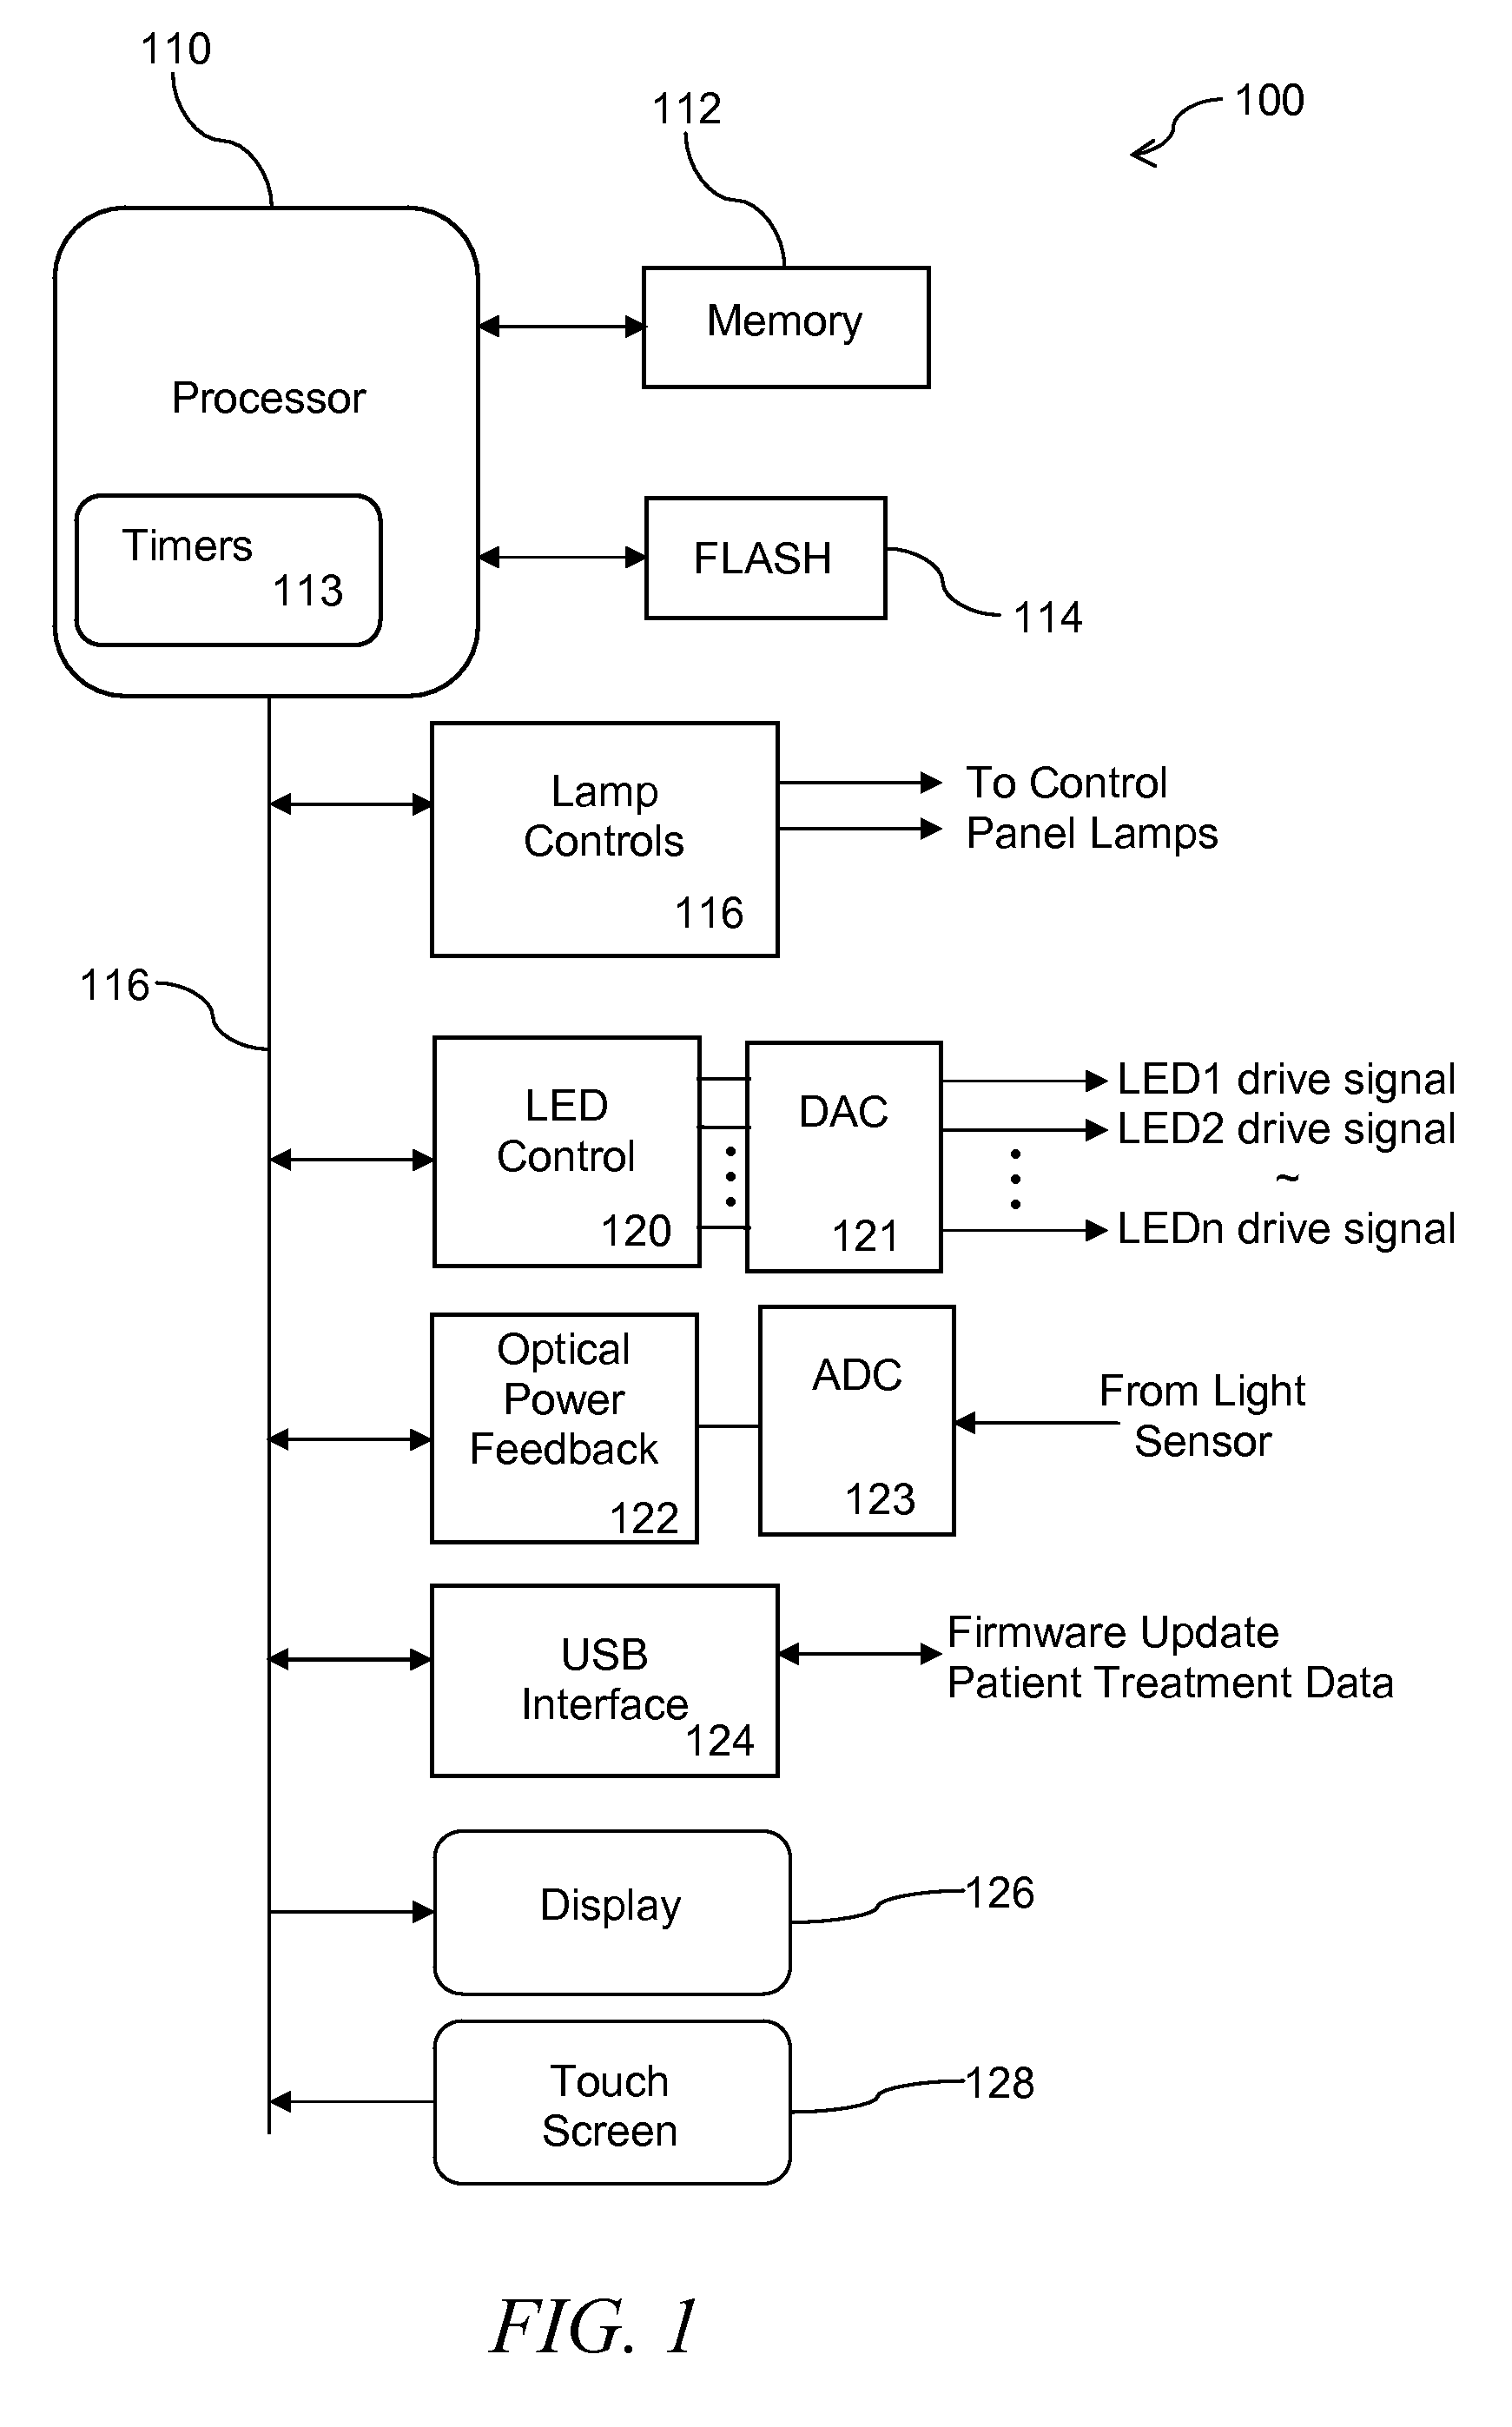 System and apparatus providing a controlled light source for medicinal applications